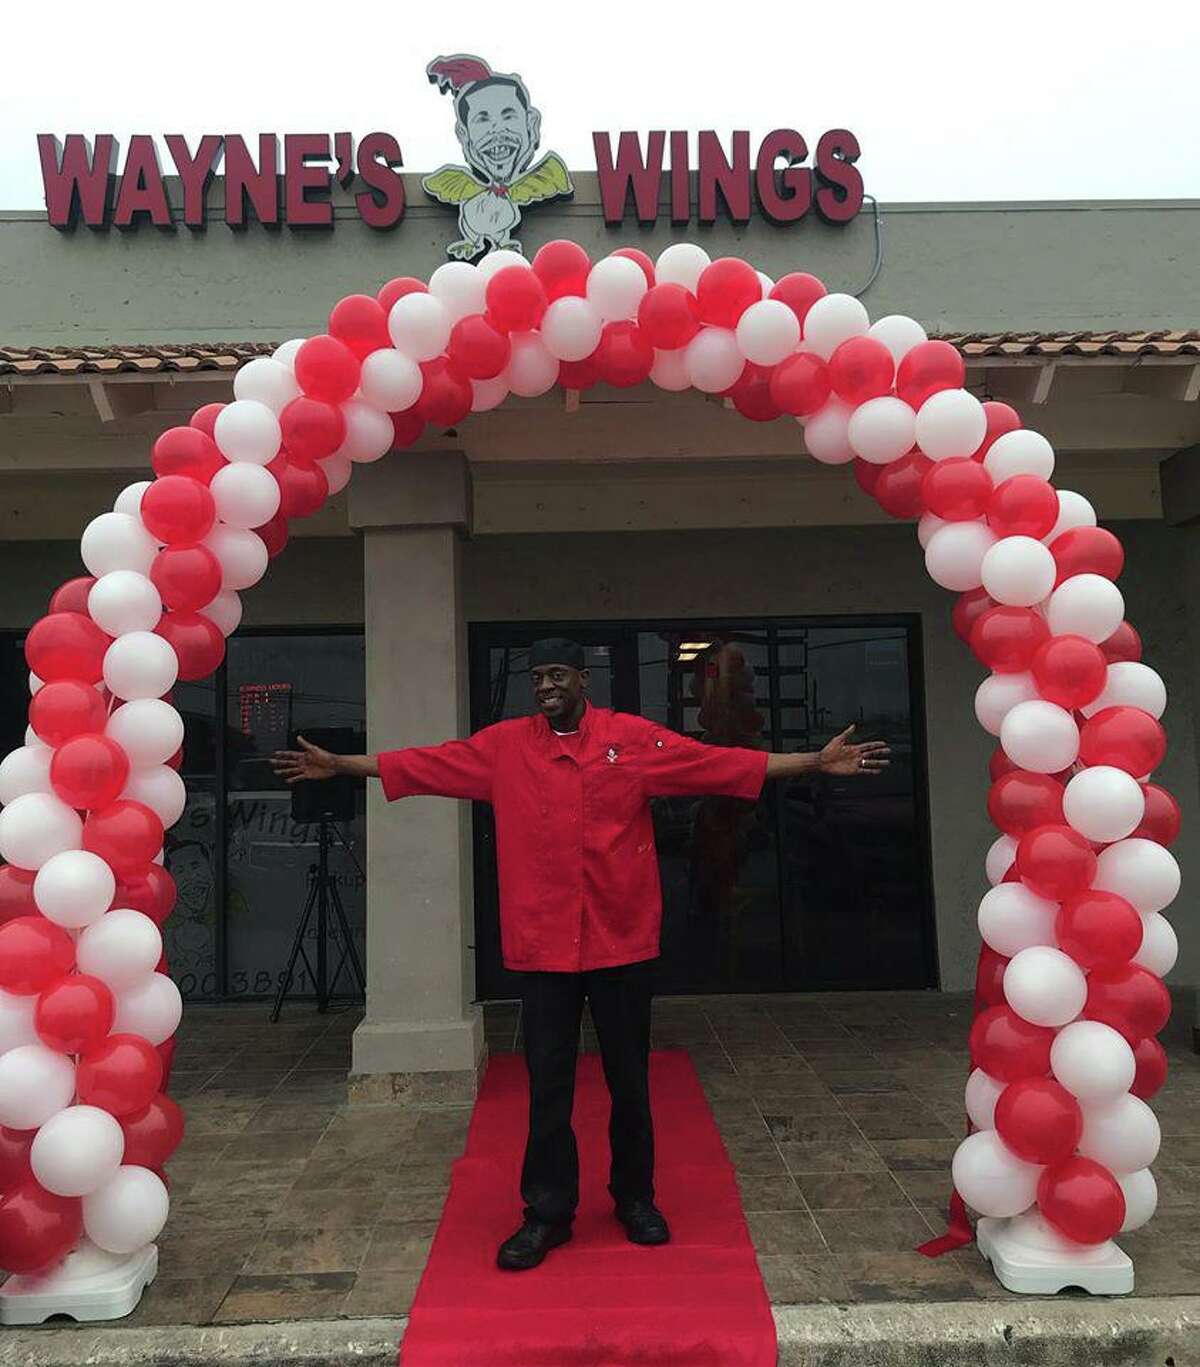 Wayne’s Wings owner Dwayne Price celebrates the grand opening of his new